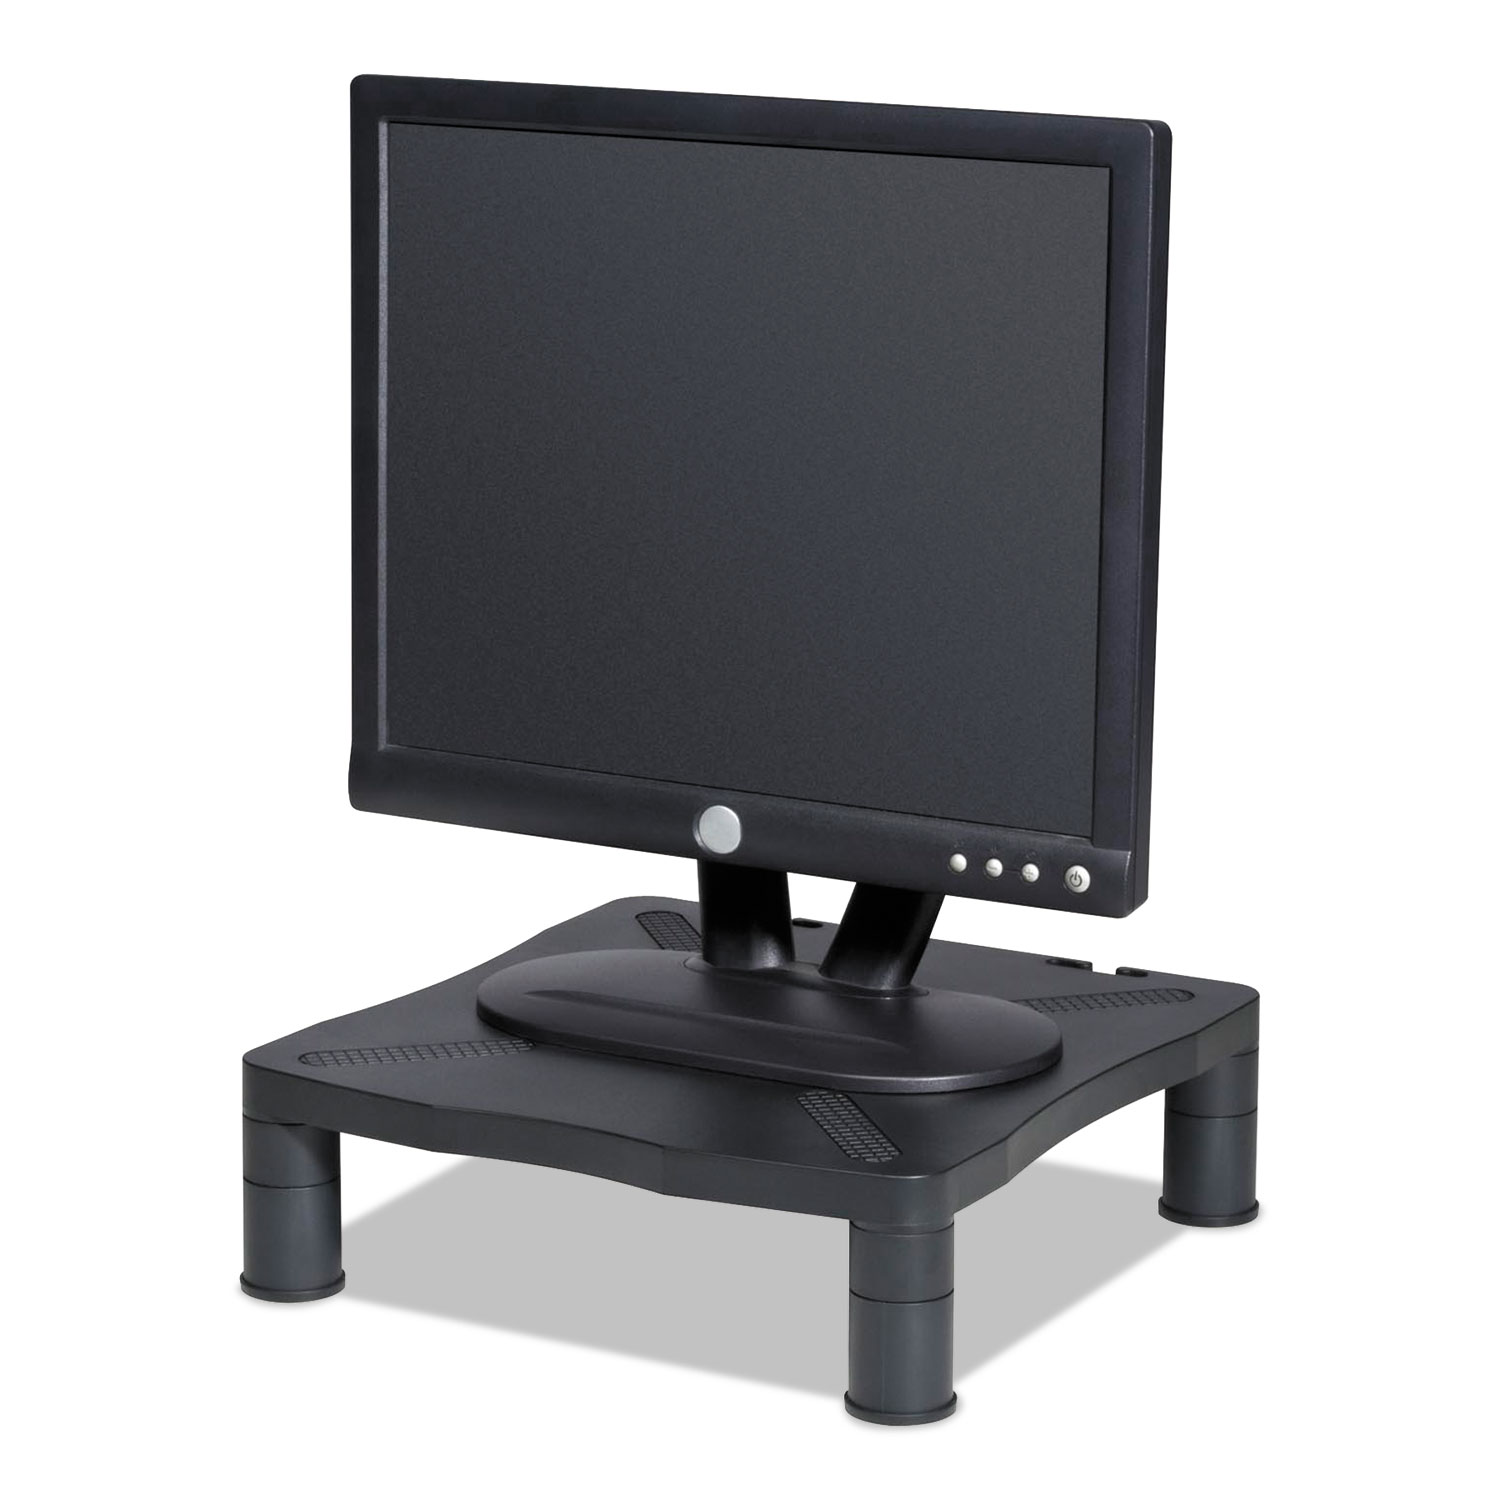  Kelly Computer Supply KCS10367 Adjustable Monitor Stand, 13-1/4 x 13-1/2 x 2 to 4, Black (KCS10367) 